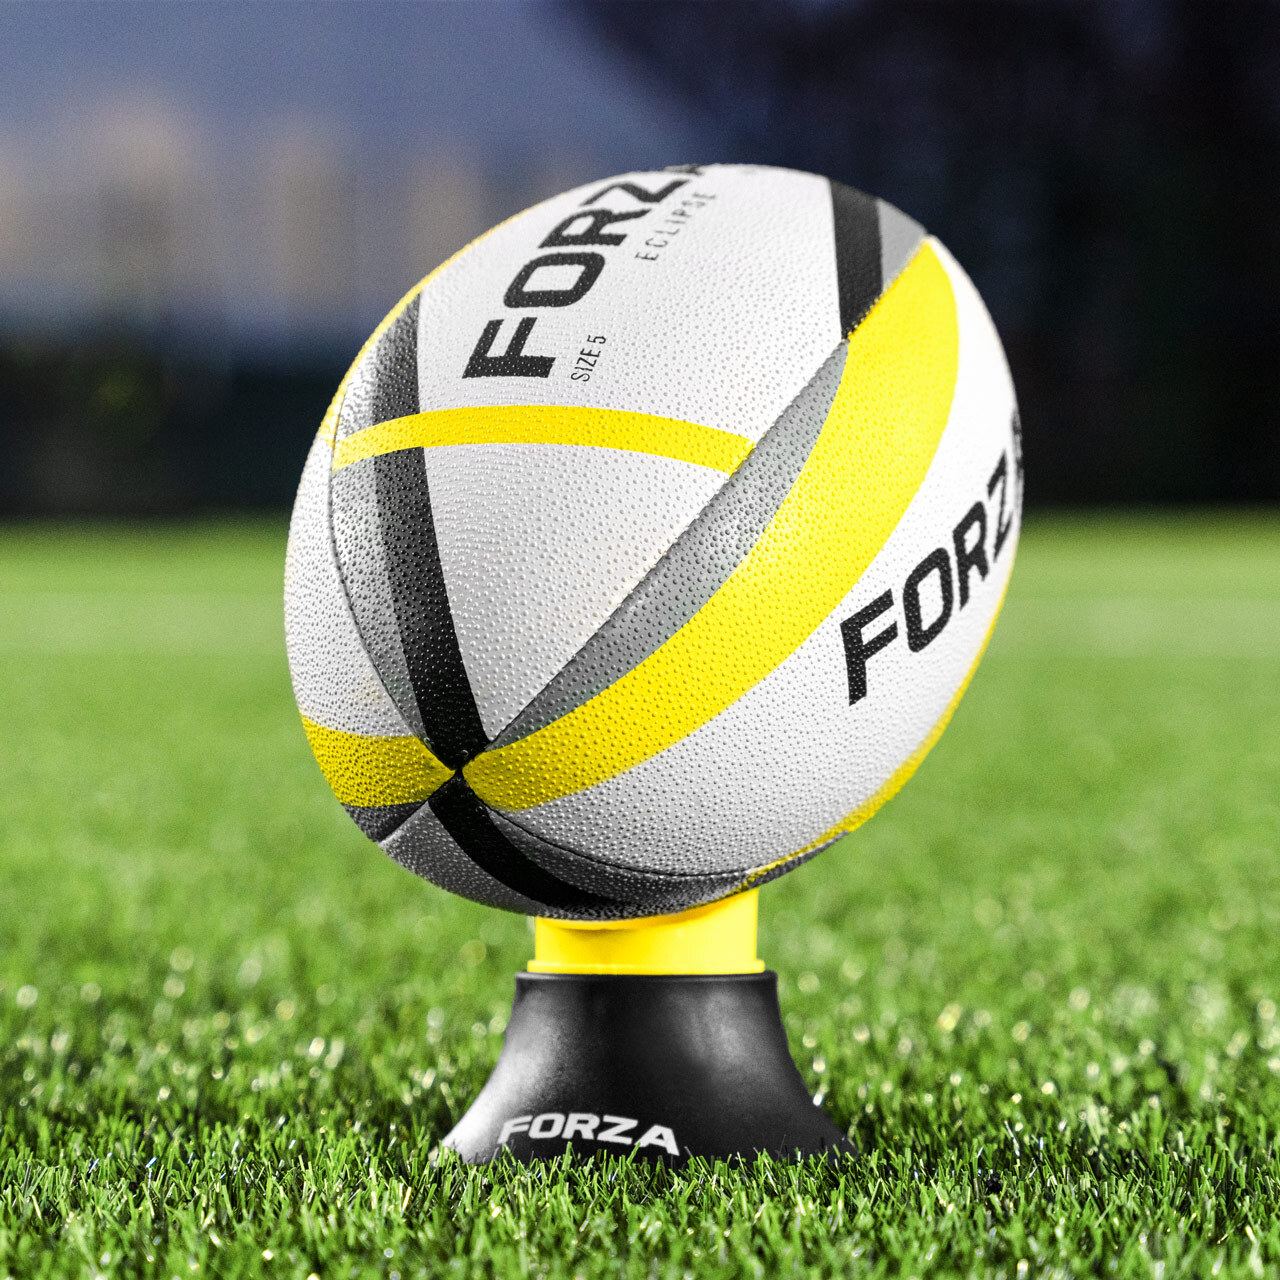 FORZA Extendable Rugby Kicking Tee